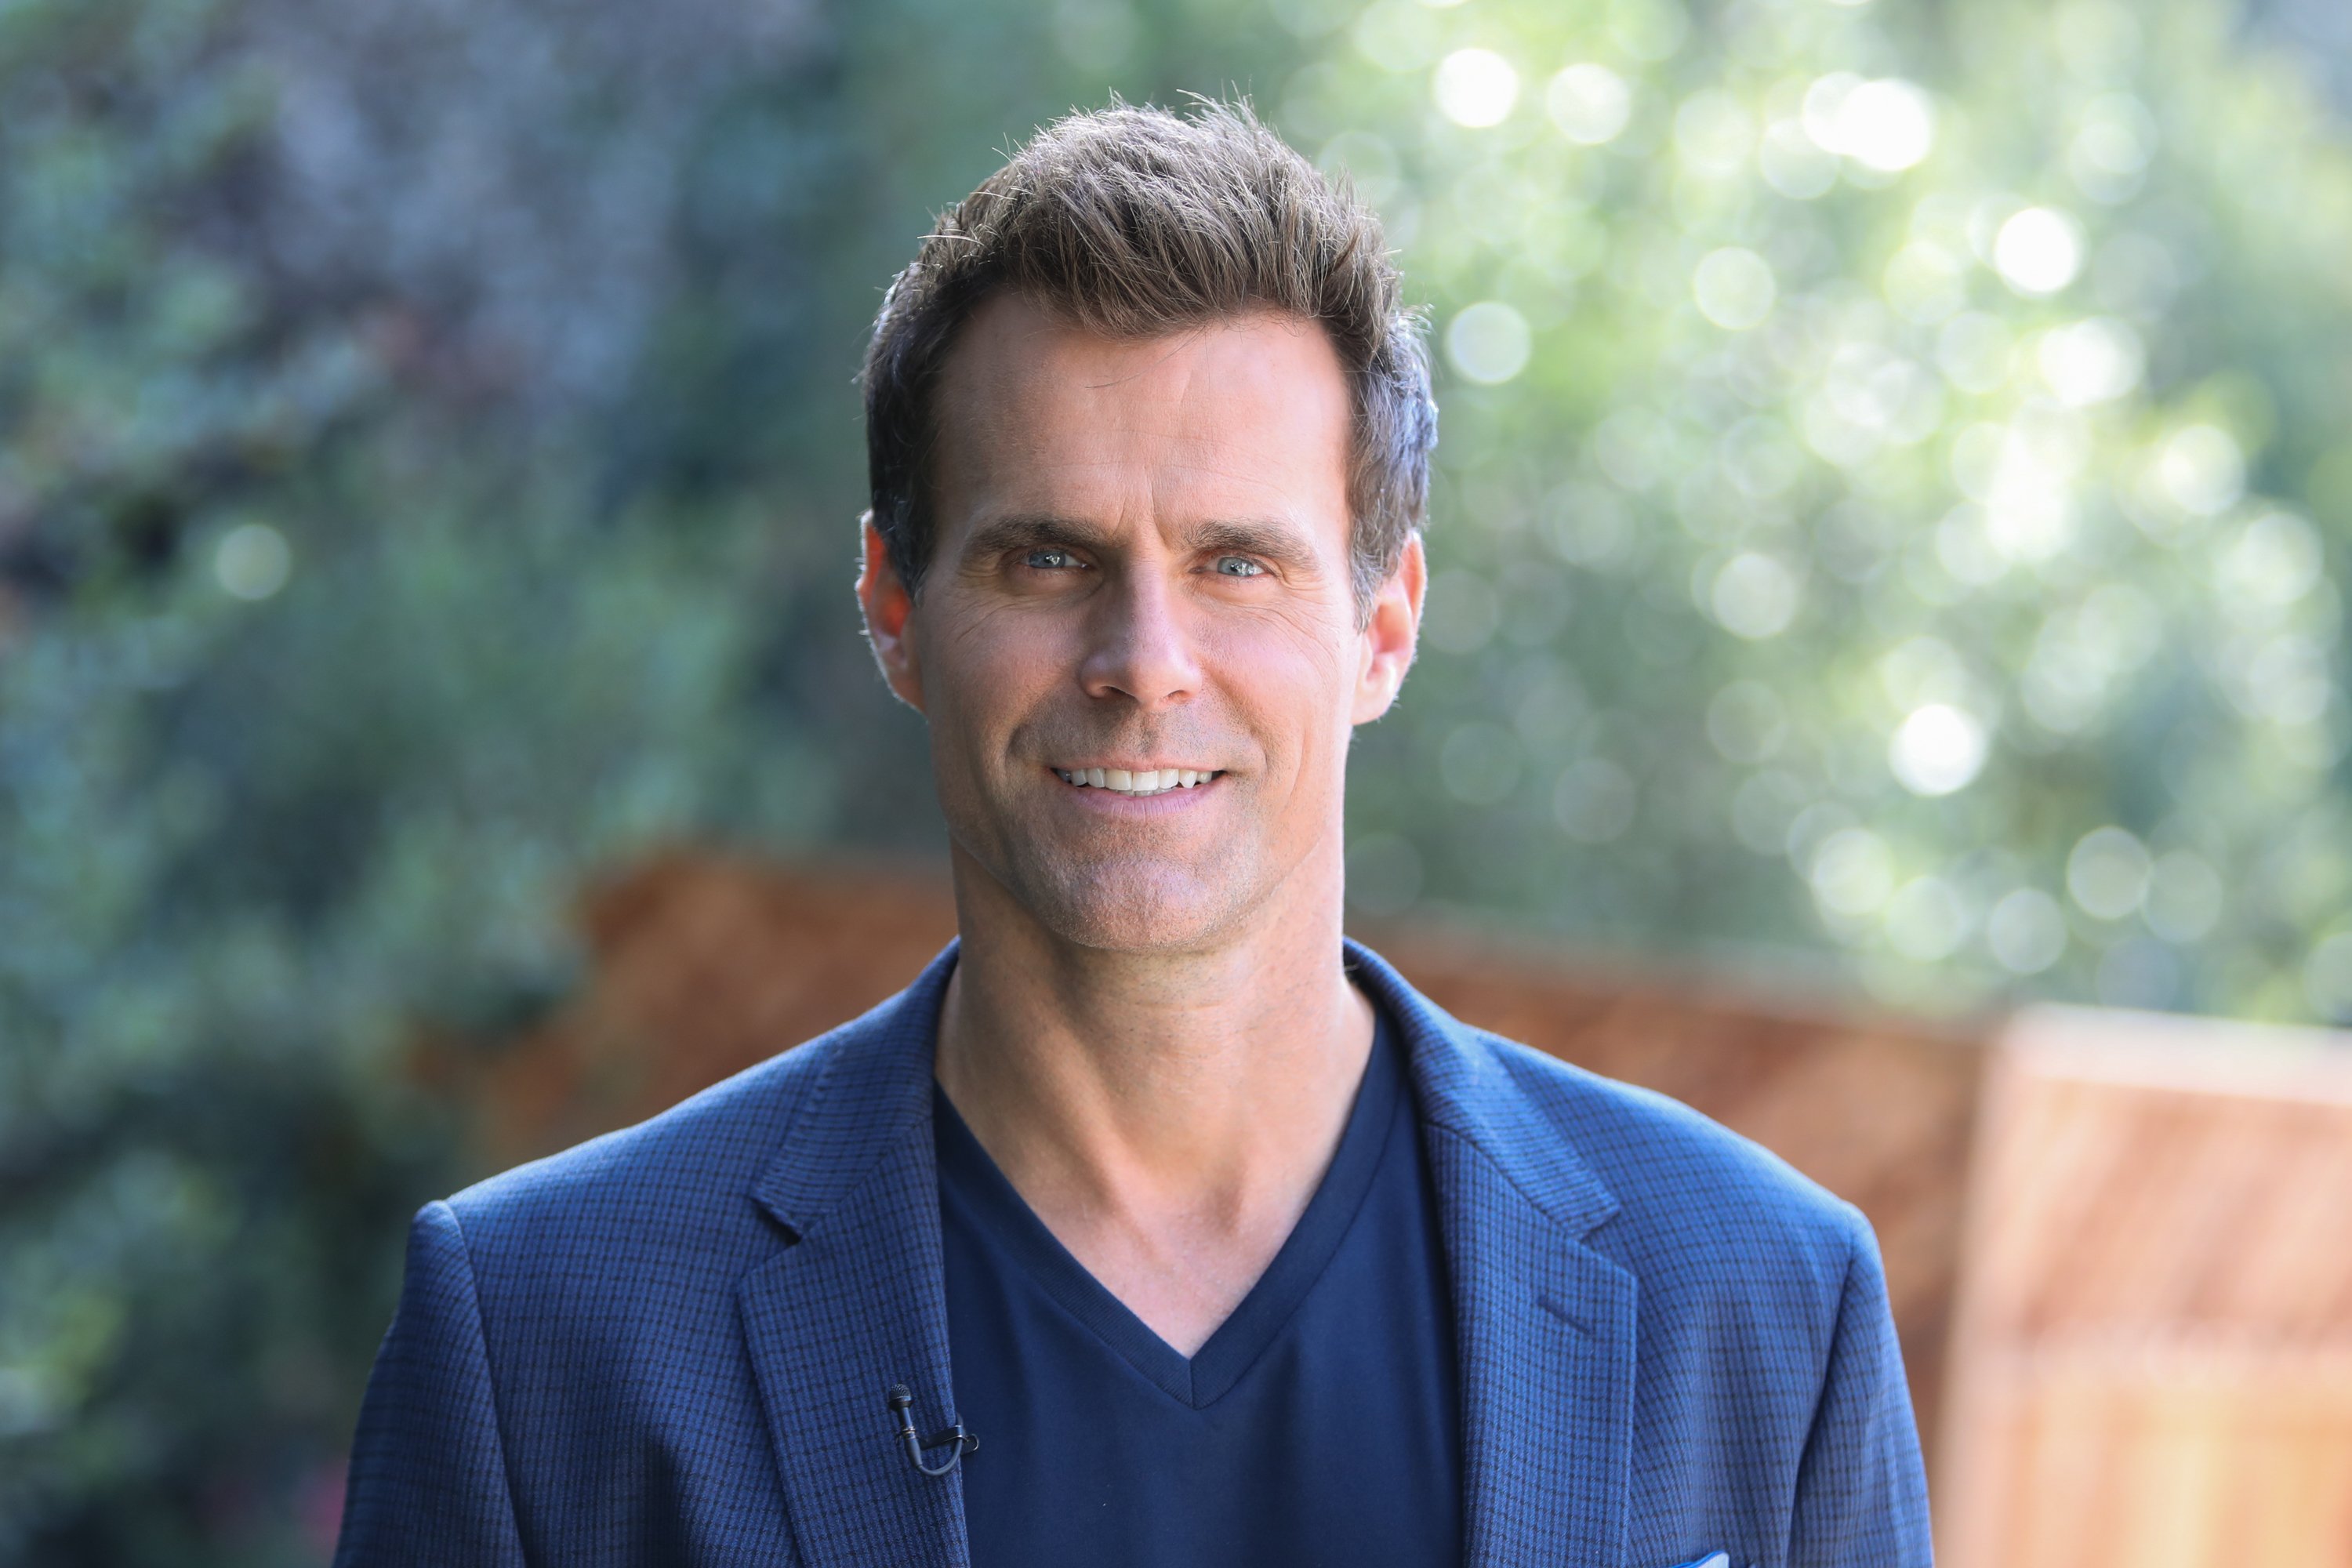 Cameron Mathison on the set of Hallmark's "Home & Family" at Universal Studios Hollywood on October 30, 2018.  | Photo: Getty Images